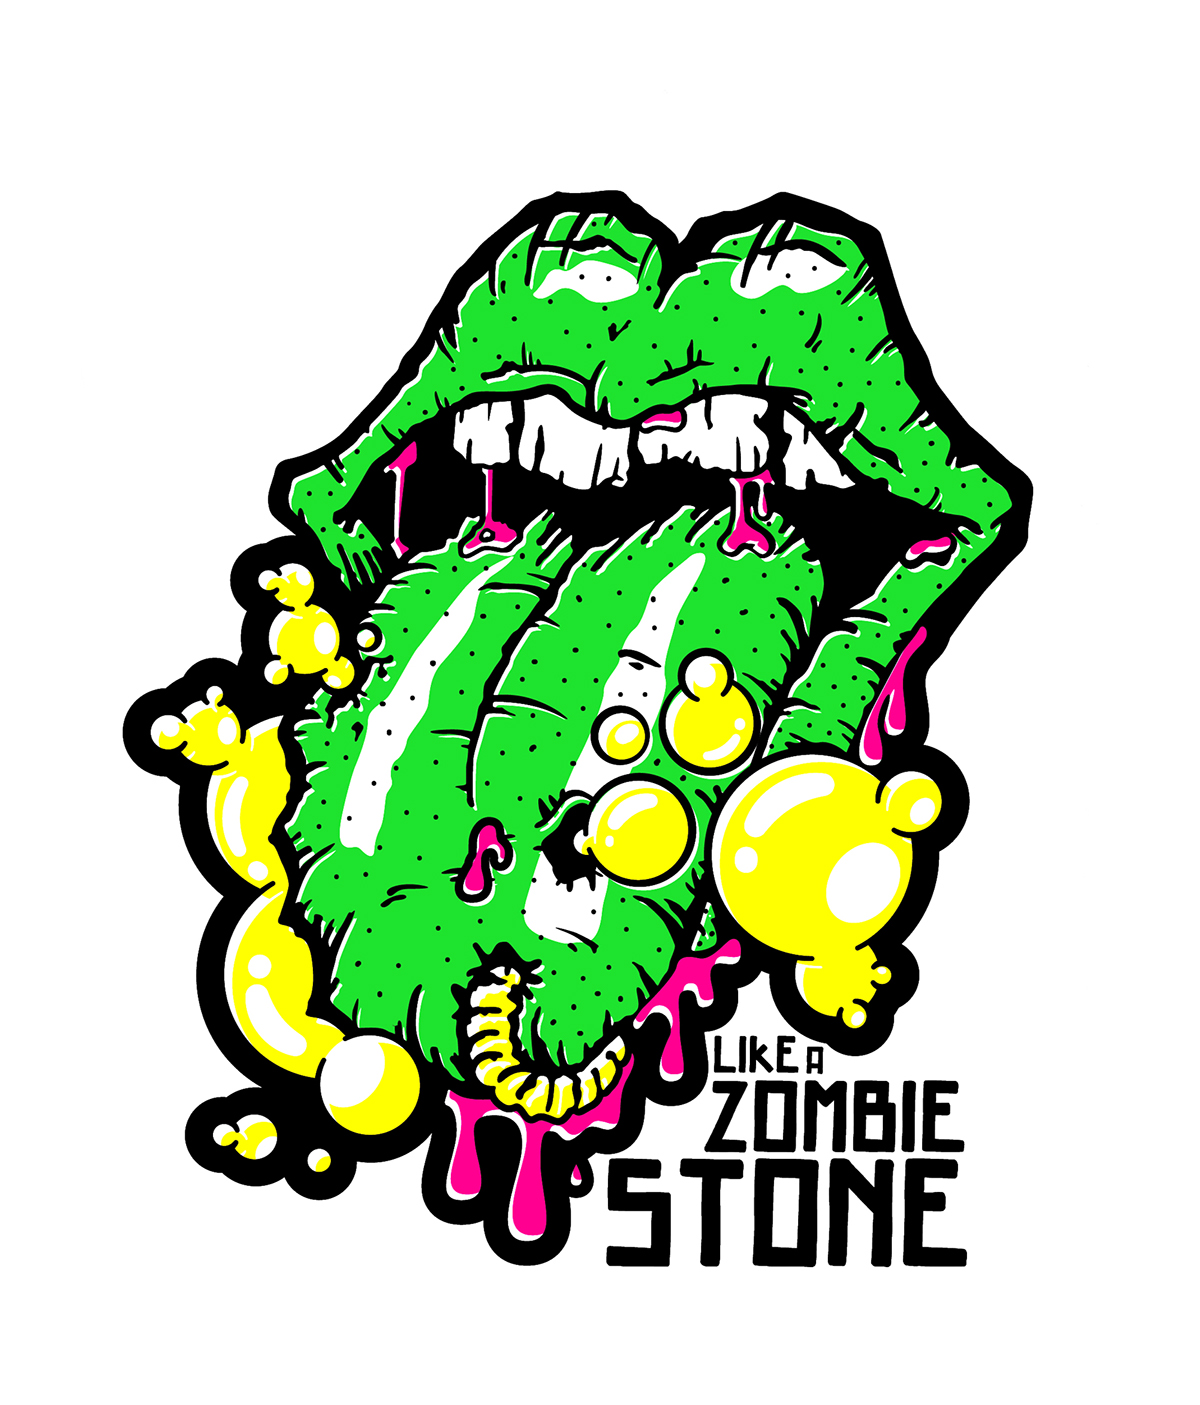 rolling stones zombies stones Like A Rolling stone lengua tongue